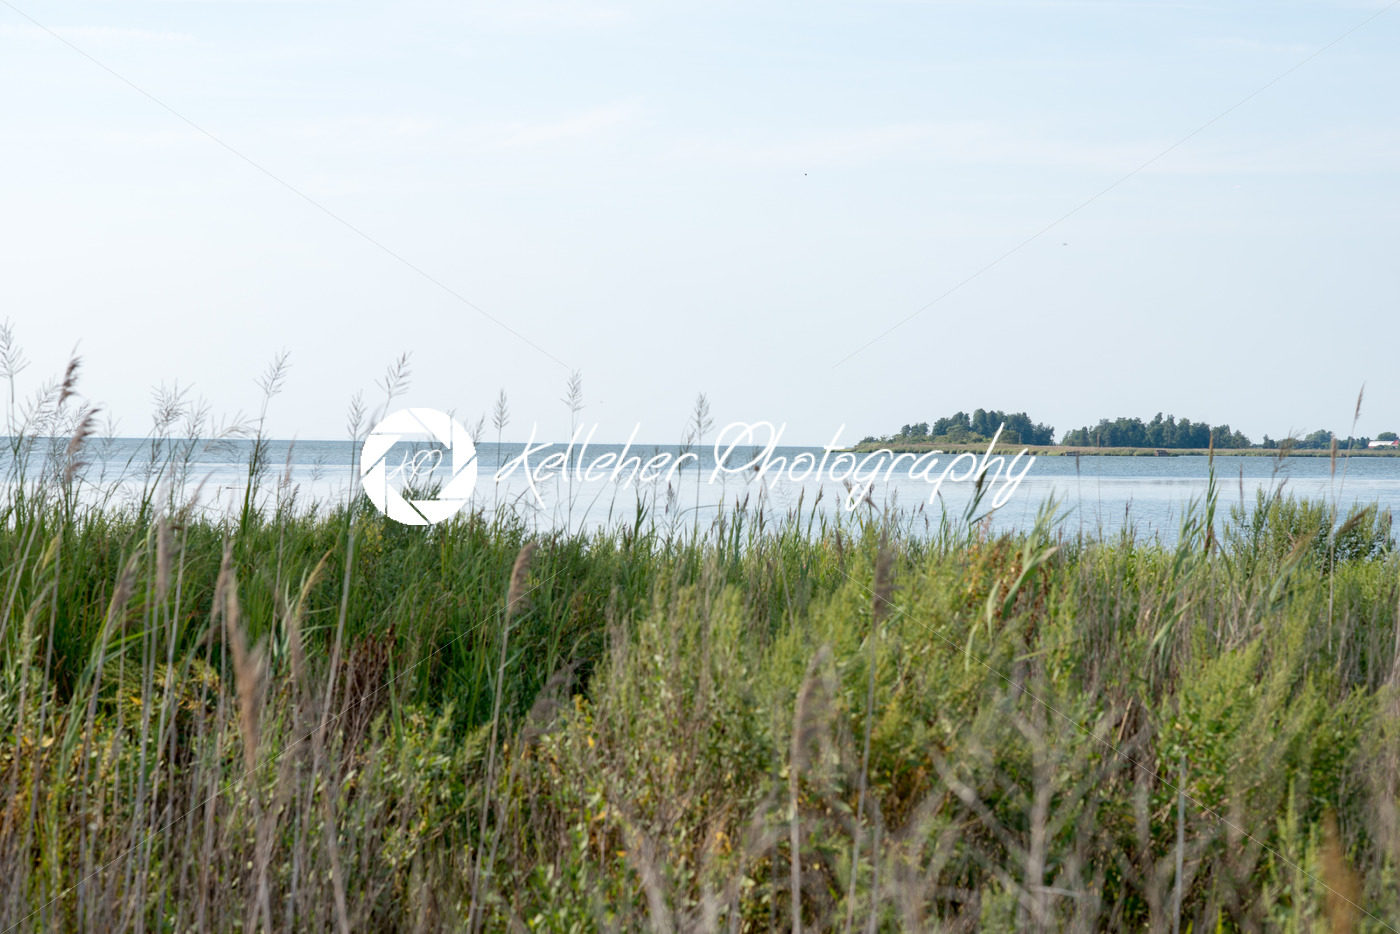 Thickets of reeds and Chesapeake Bay on Maryland Eastern Shore near Rock Hall, MD - Kelleher Photography Store